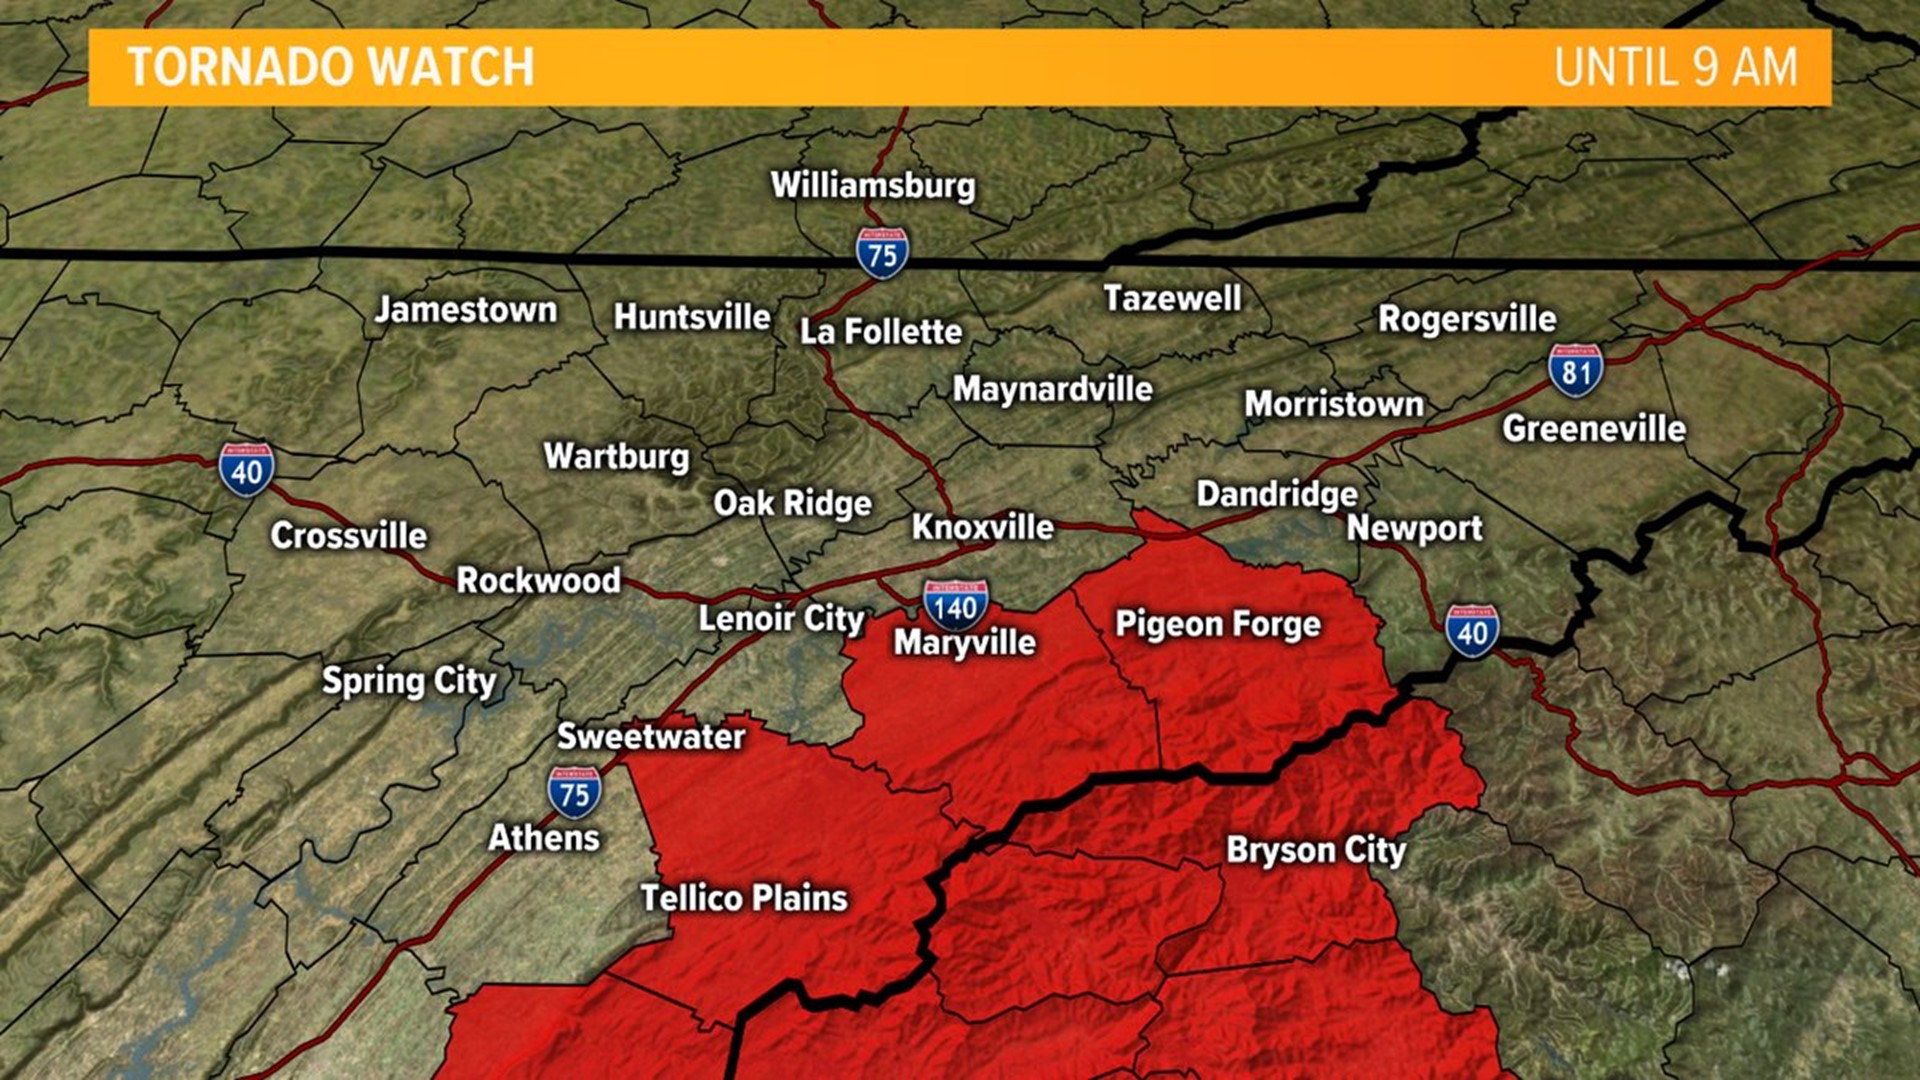 A Tornado Watch is in effect for parts of East Tennessee until 9 AM EST